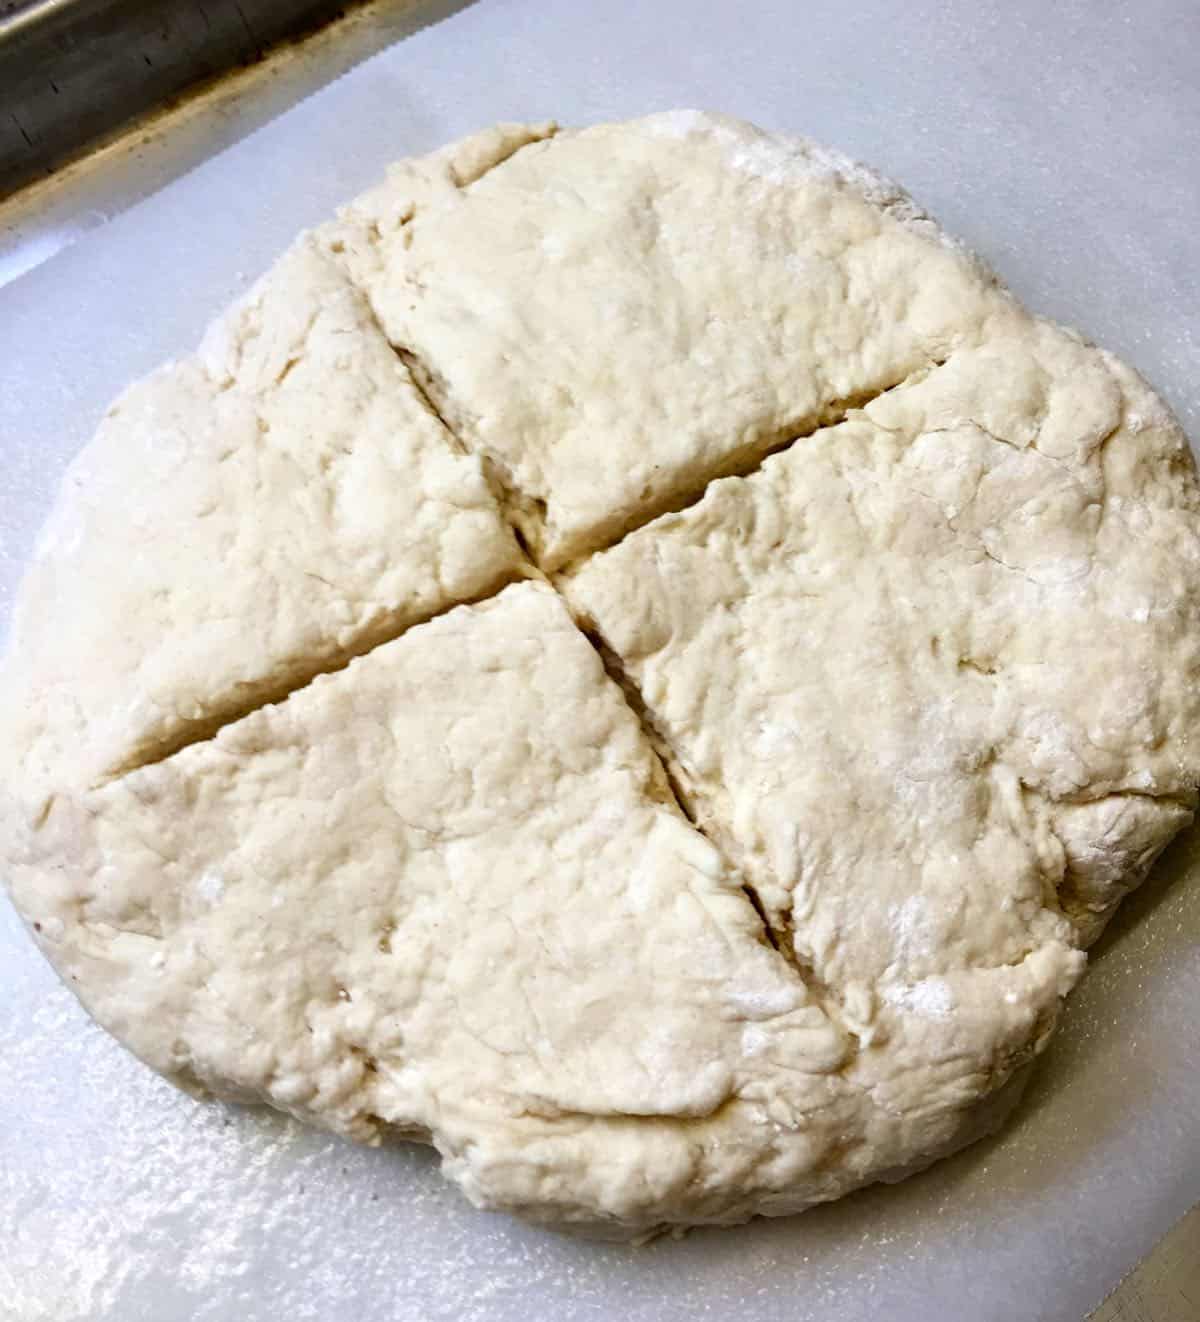 Soda bread dough with a cross cut into the top of it.